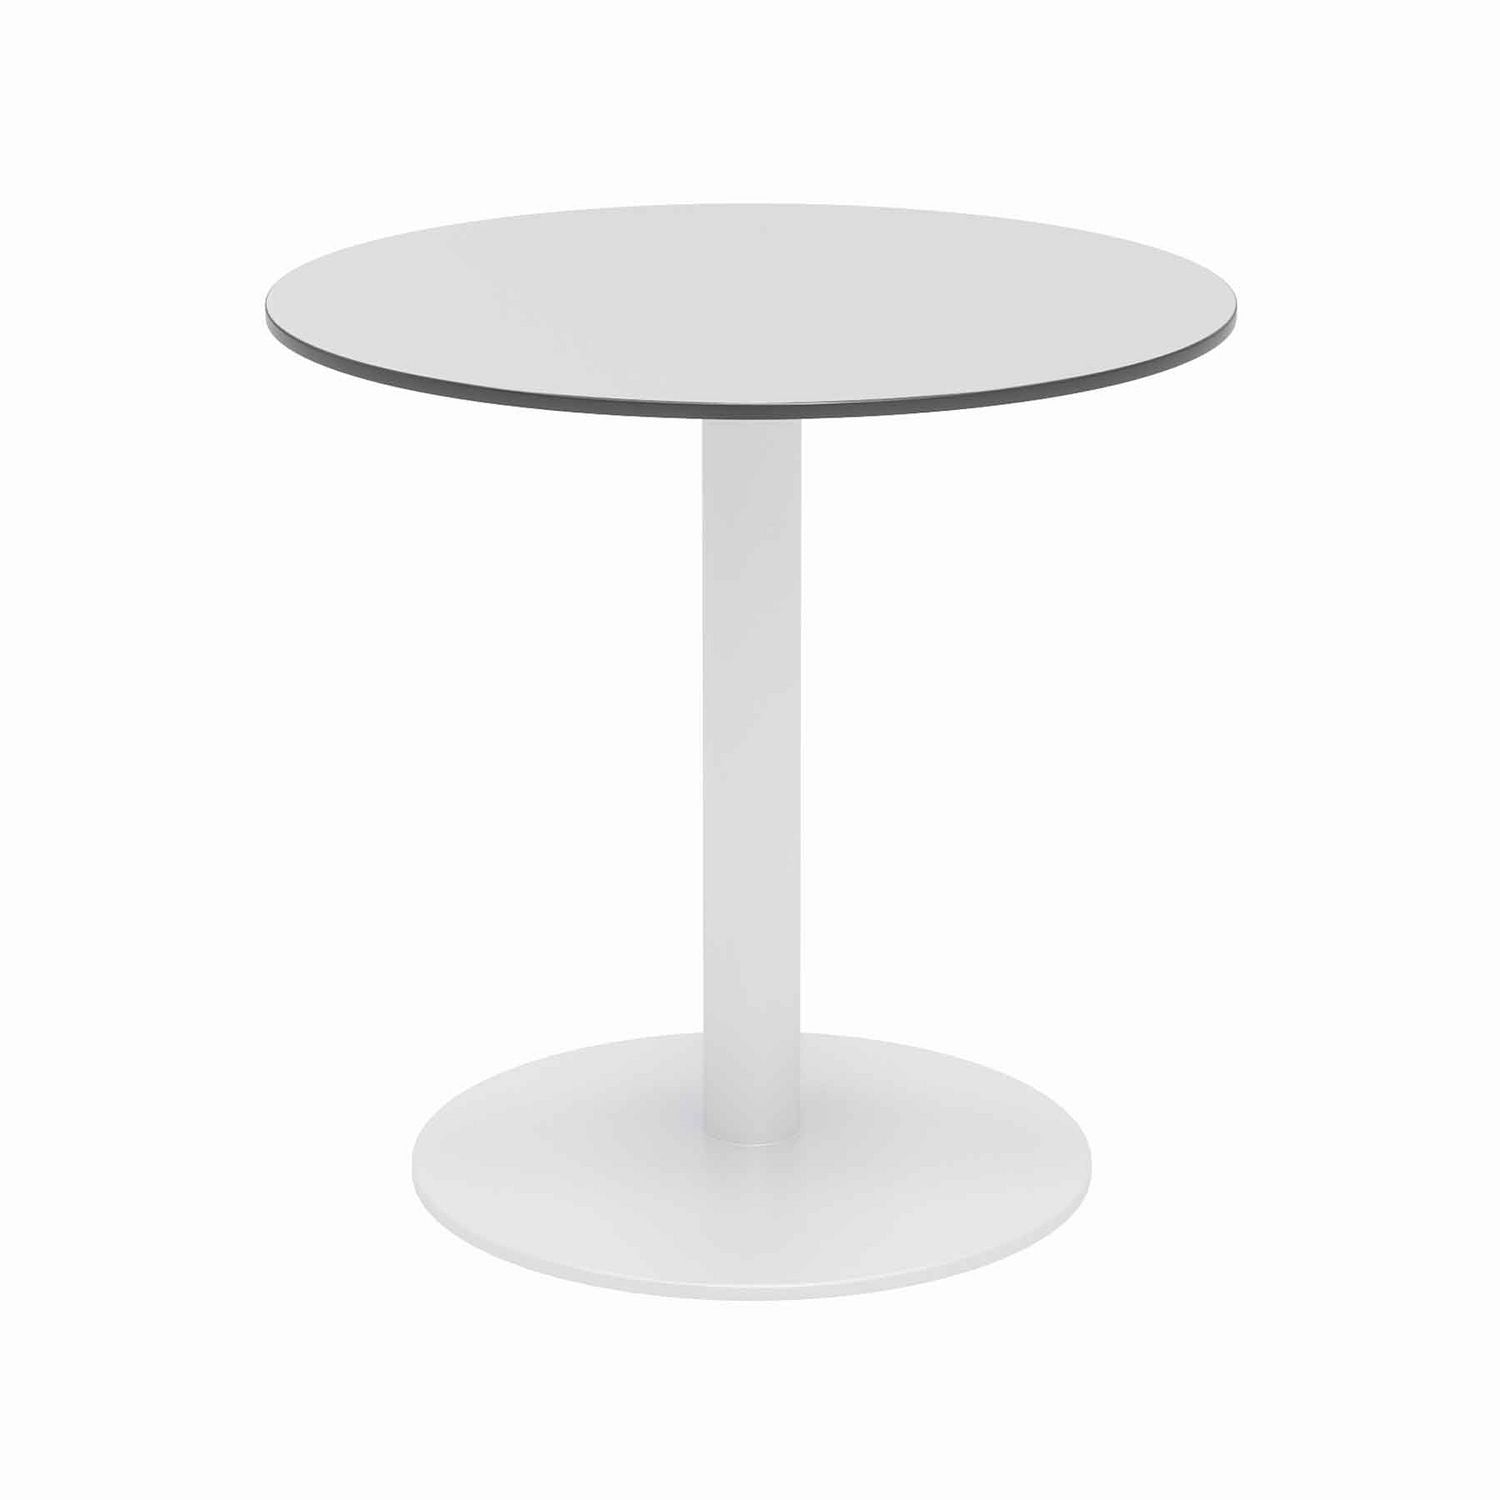 eveleen-outdoor-patio-table-with-2-gray-powder-coated-polymer-chairs-30-dia-x-29h-designer-white-ships-in-4-6-bus-days_kfi840031918451 - 2